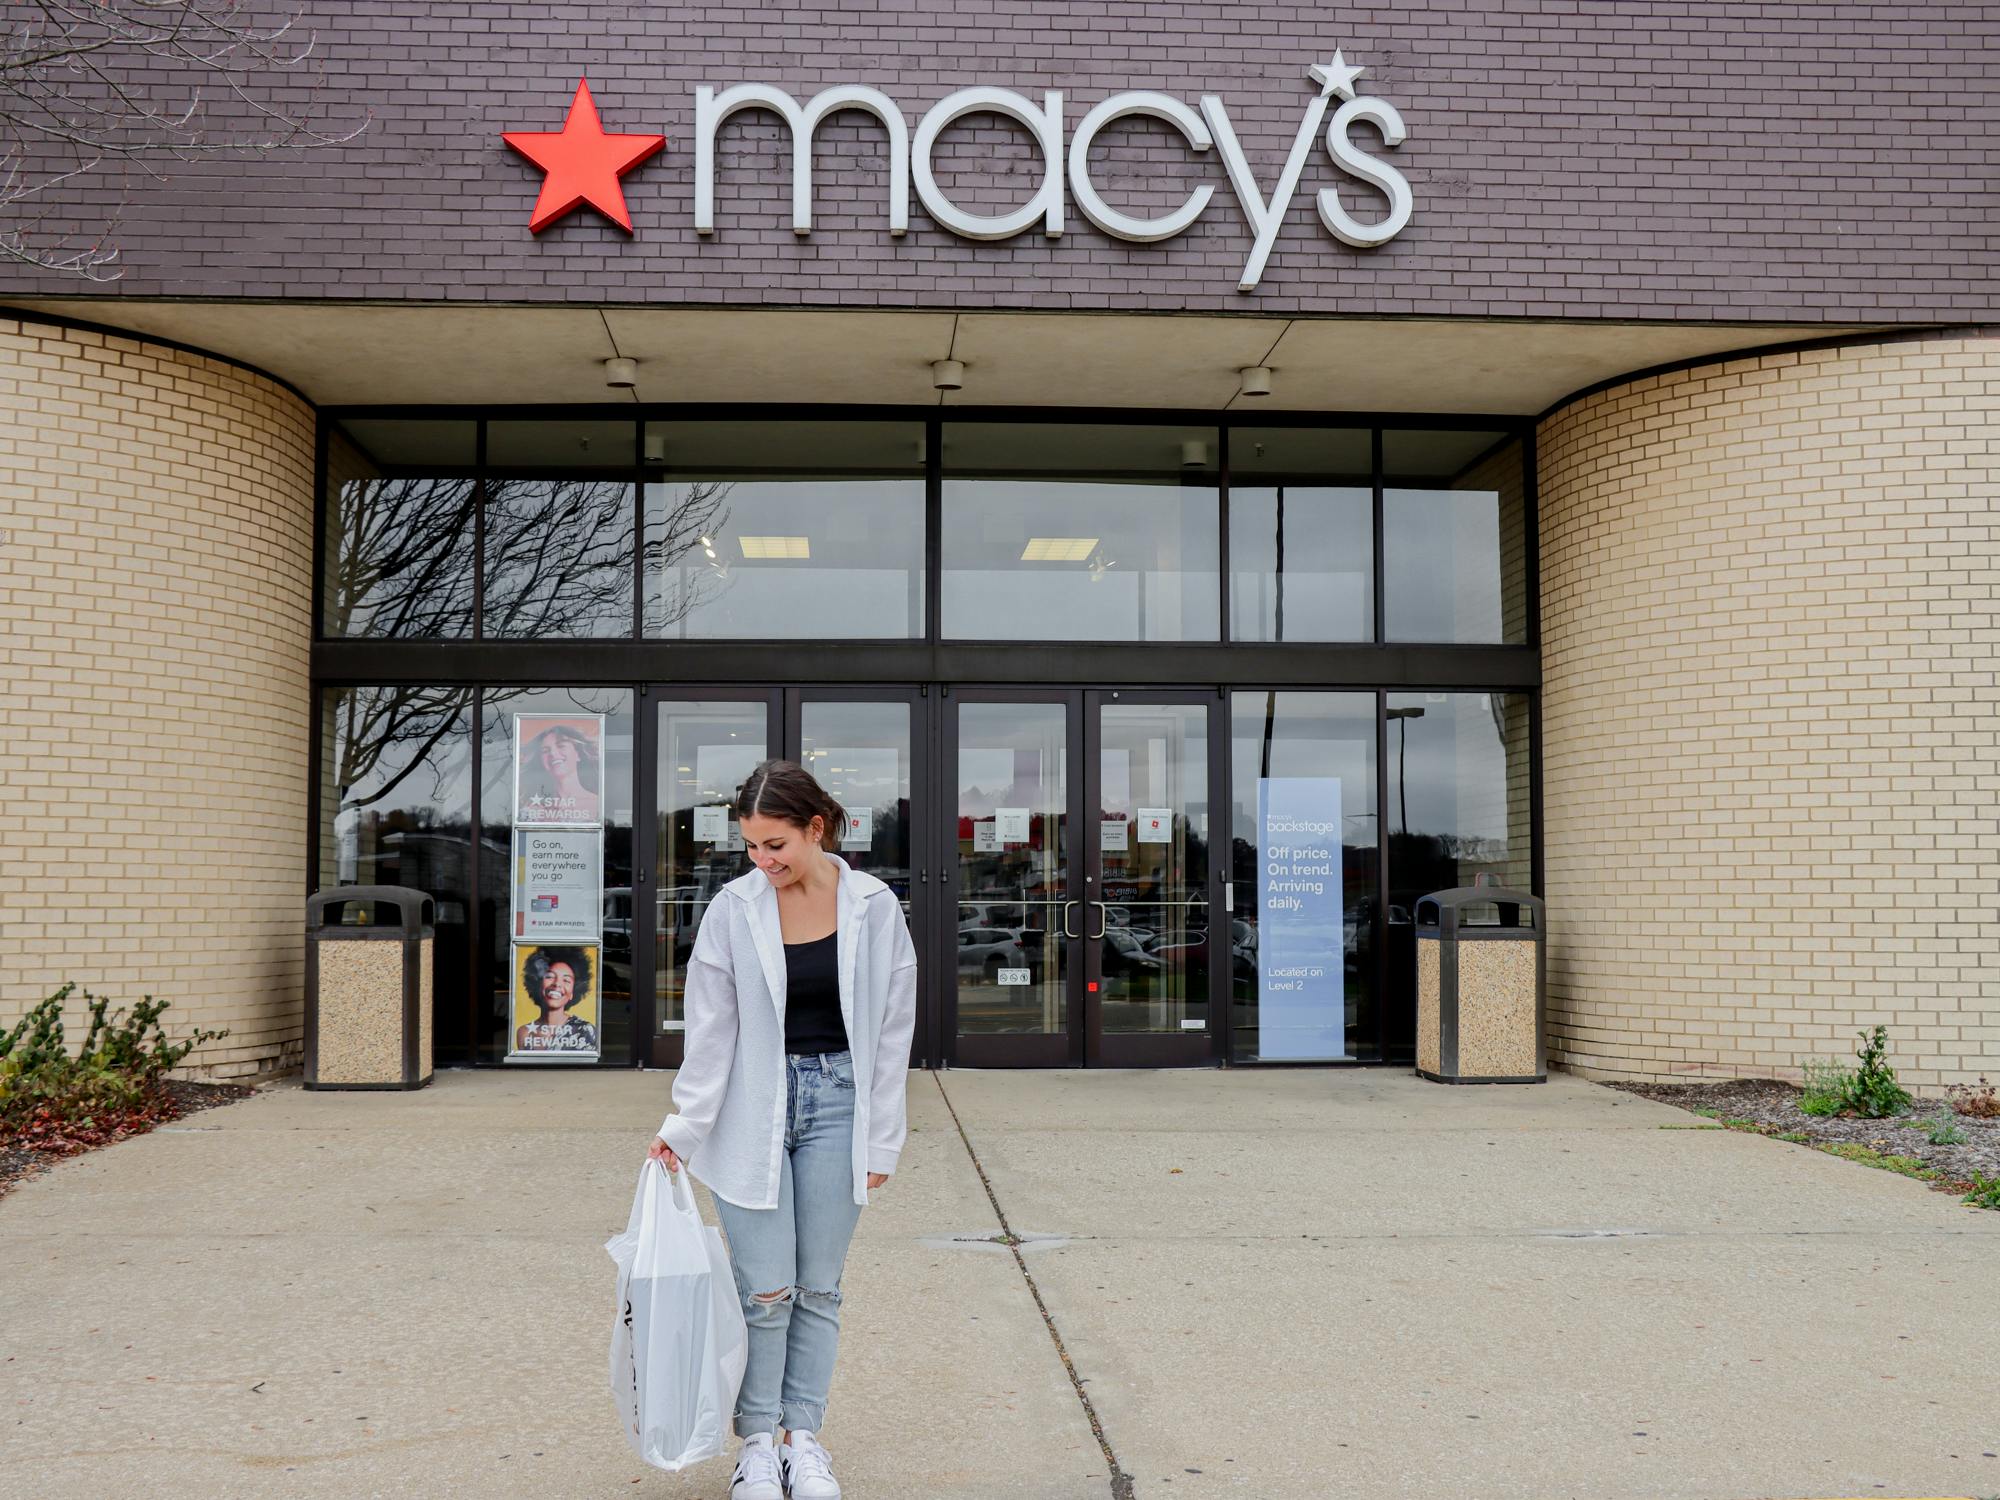 How to get macy's coupons $20 off $50 - Quora